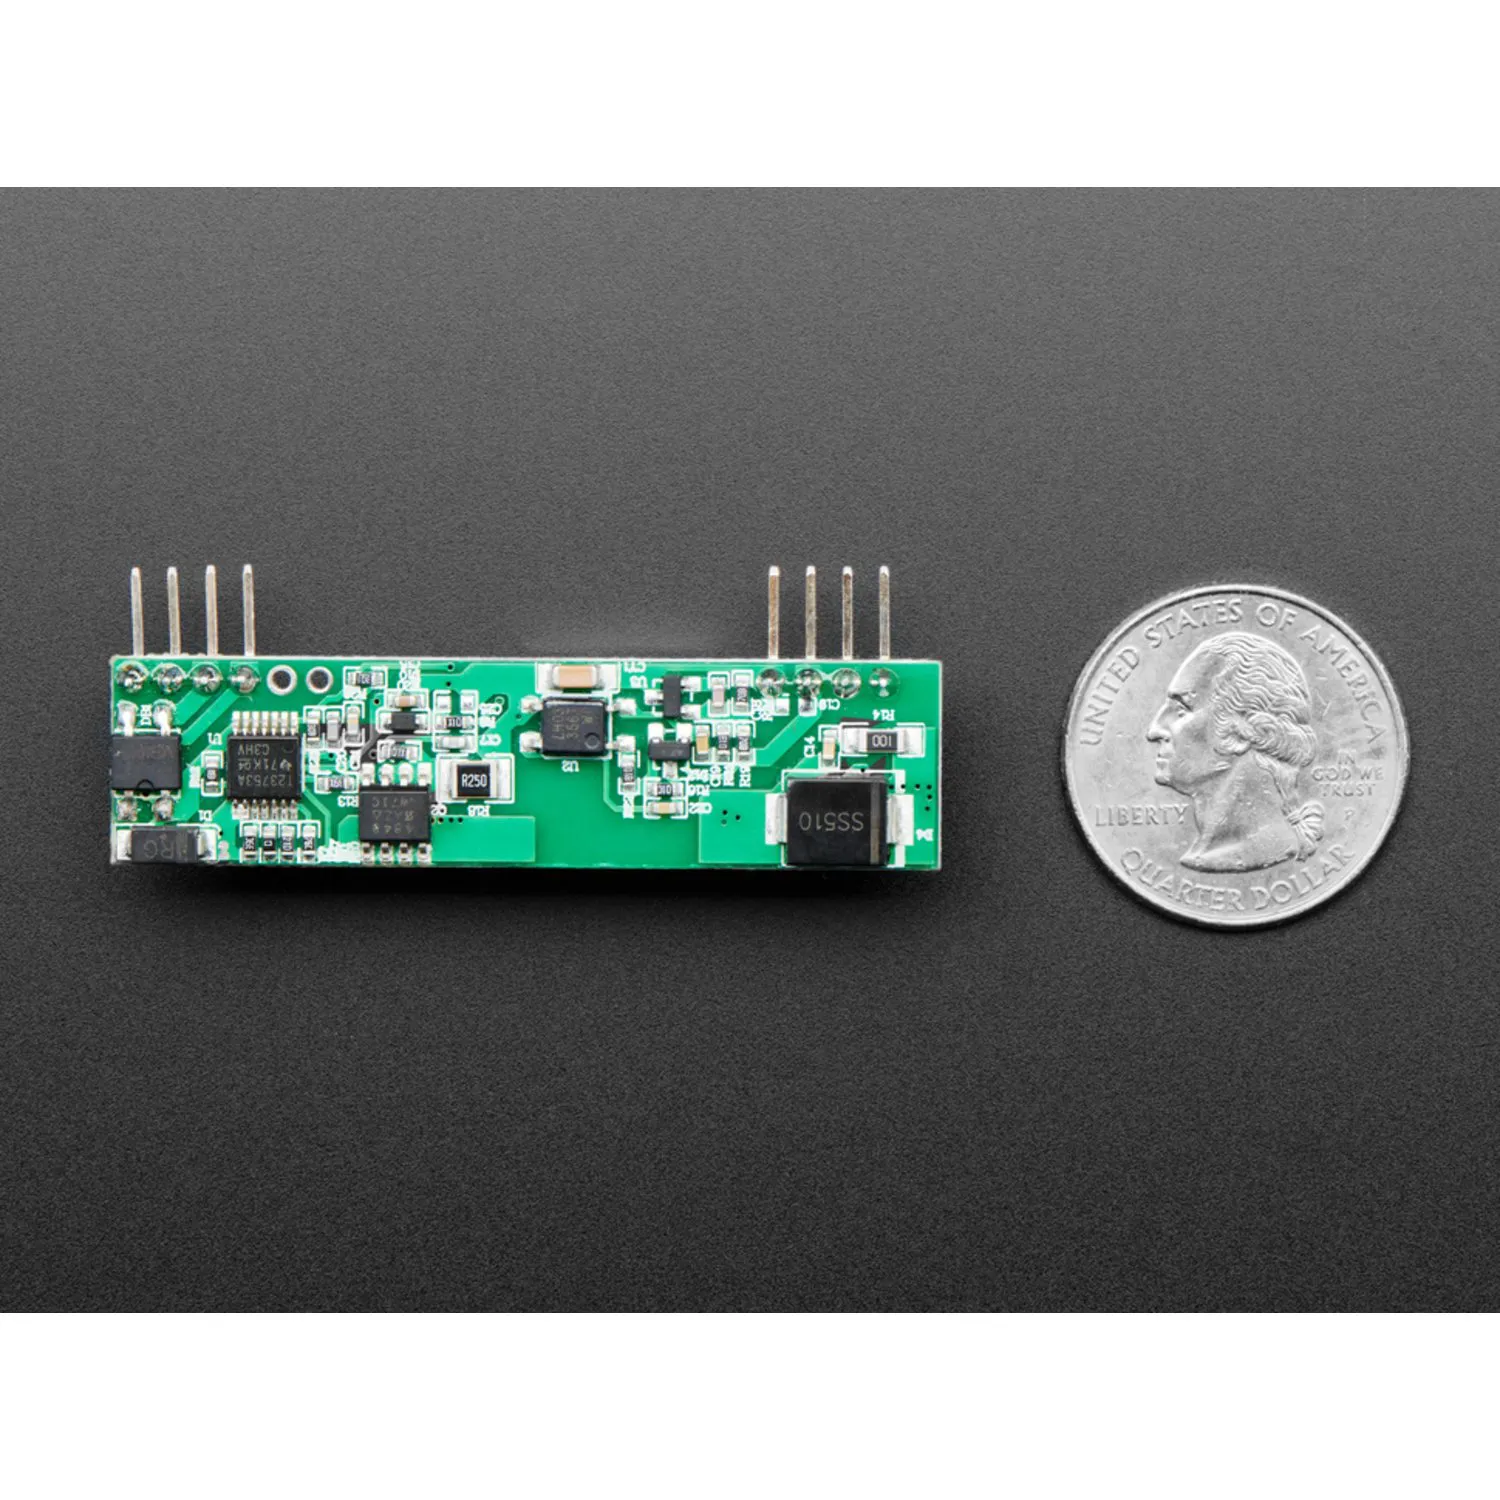 Photo of 5V 1.8A Isolated Output PoE Module Works with Raspberry Pi 3 B+